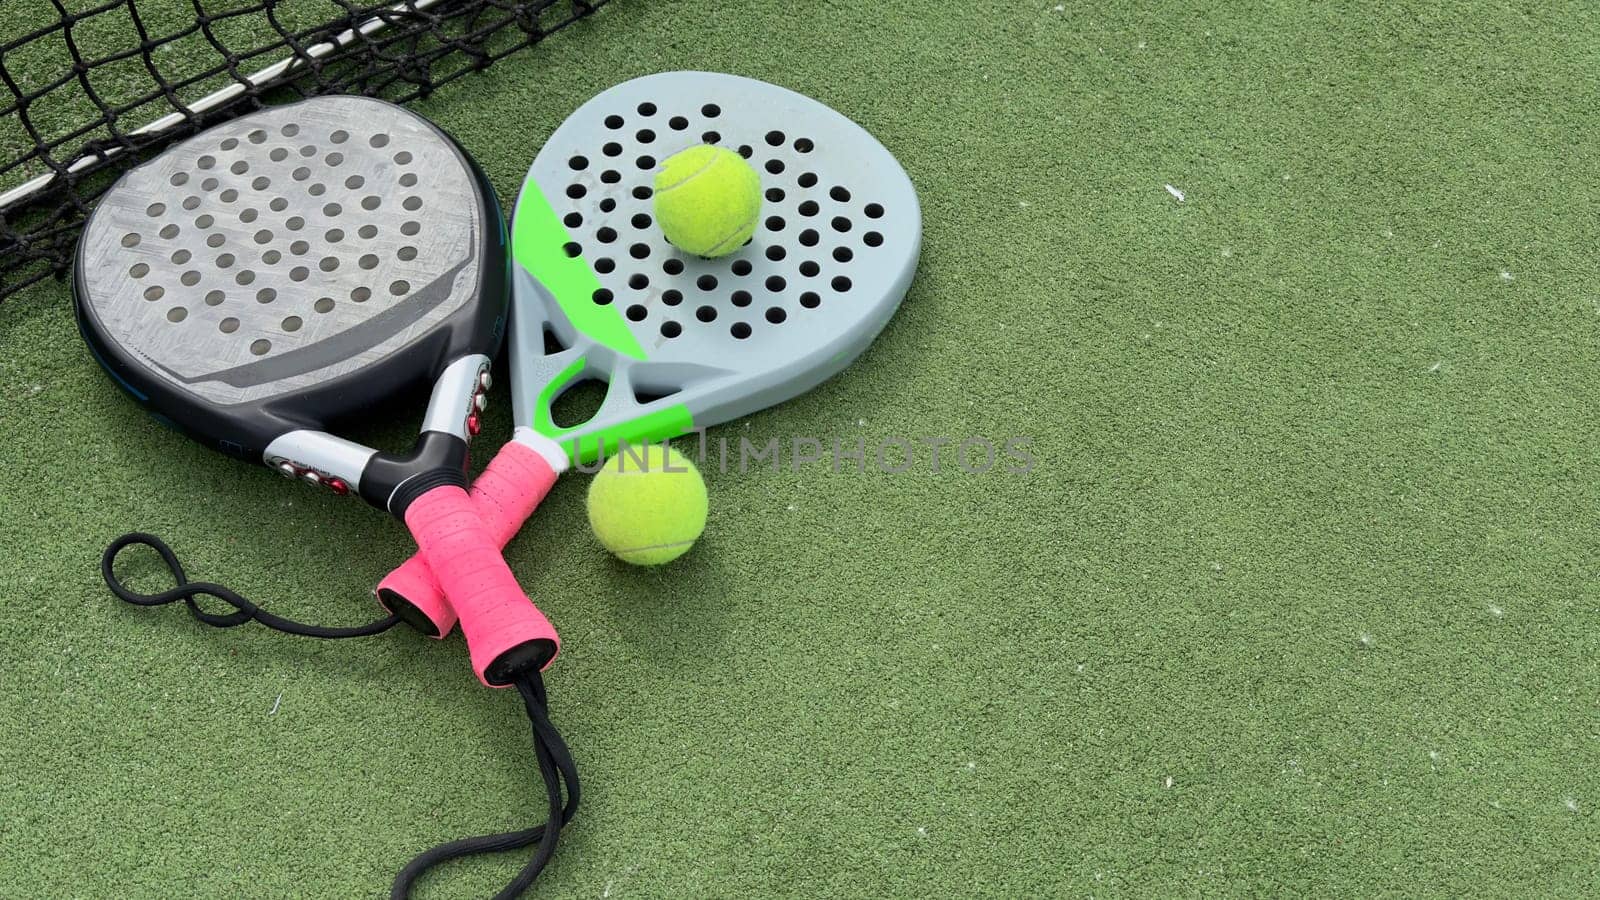 Paddle tennis objects on grass court by Andelov13